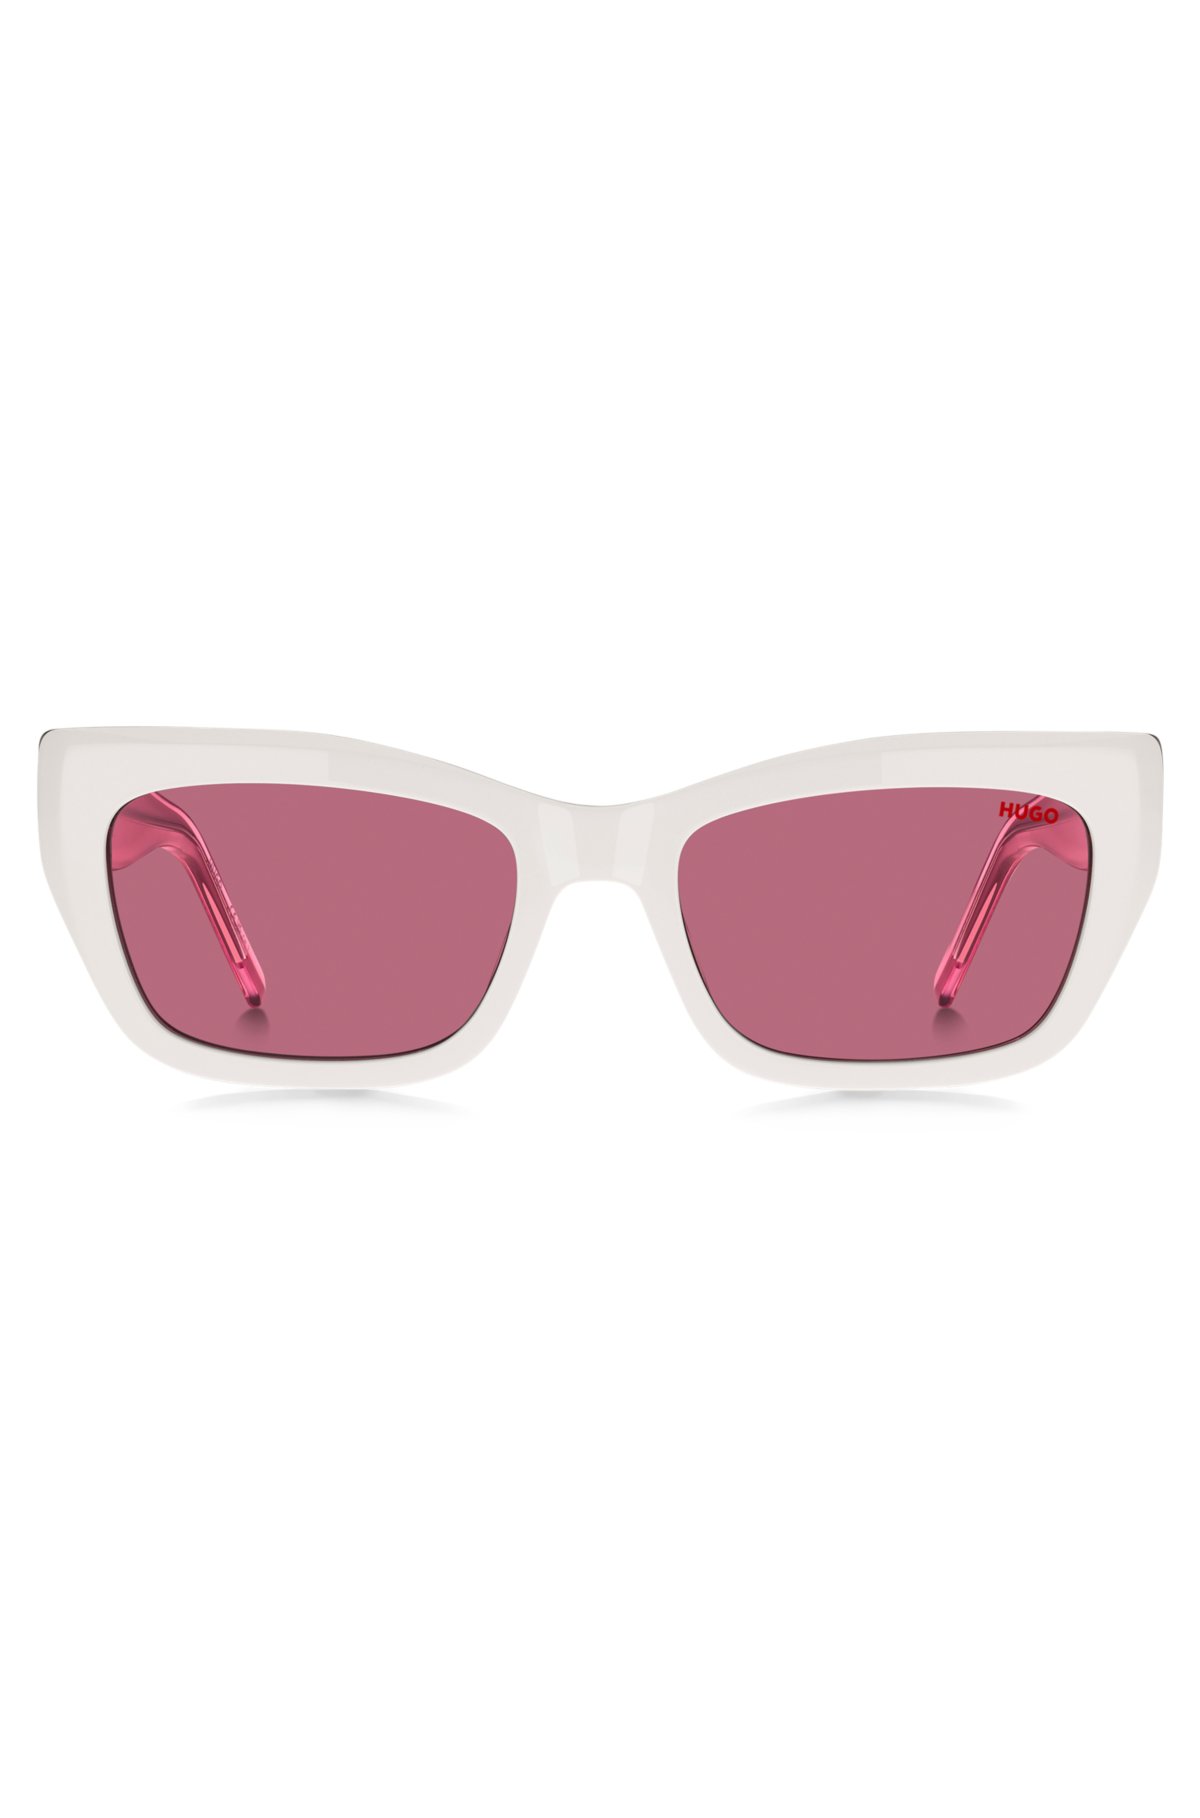 White-acetate sunglasses with pink contrasts, light pink